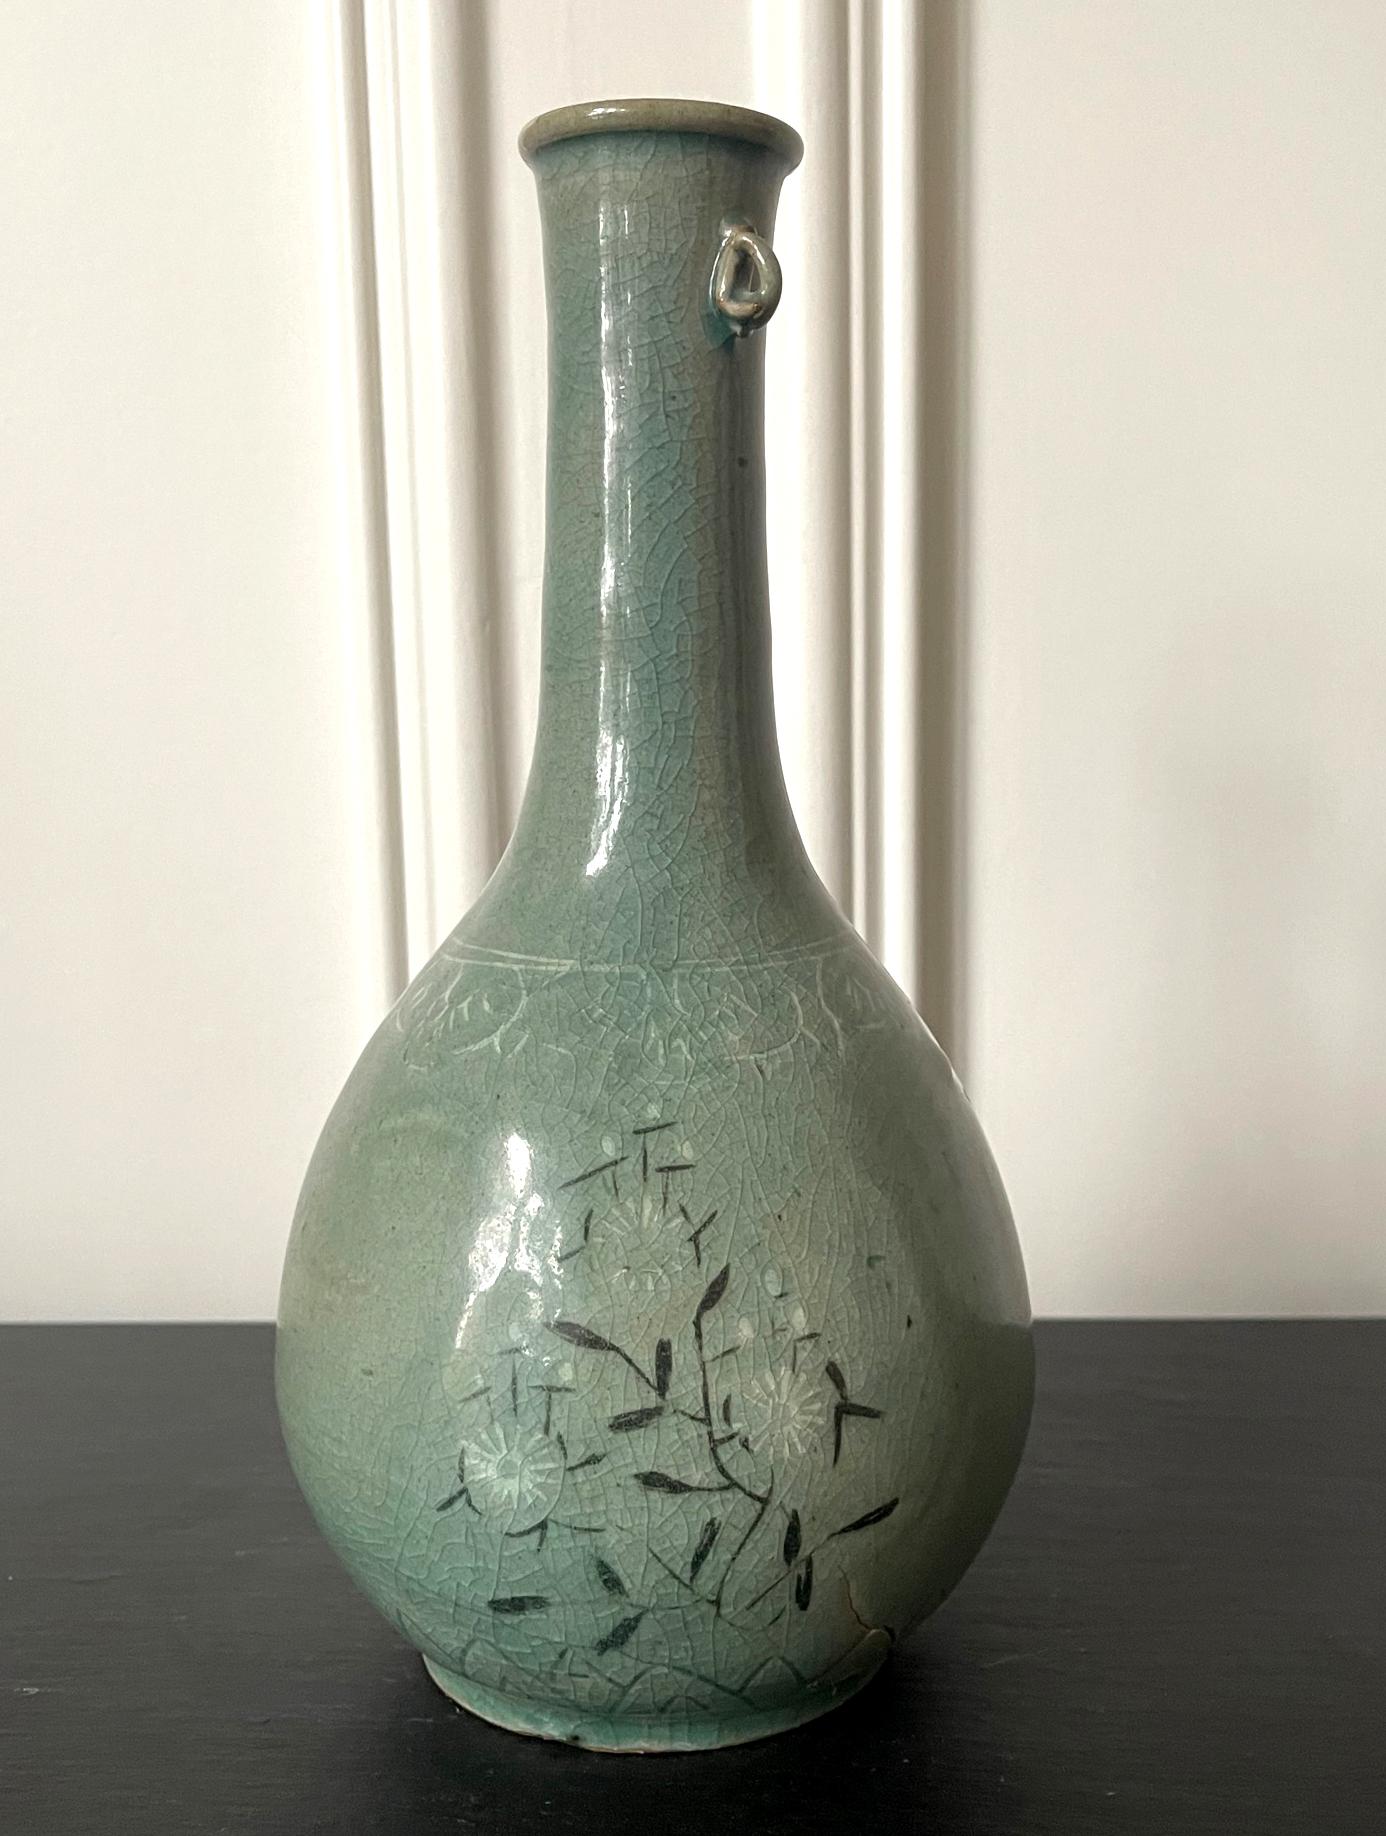 A Korean ceramic celadon bottle vase with inlay design from Goryeo Dynasty (918 to 1392AD) circa 12th century. With an elongated neck that continues down to the pear-shape body in smooth and elegant curve, and an applied lug on one side of the neck,